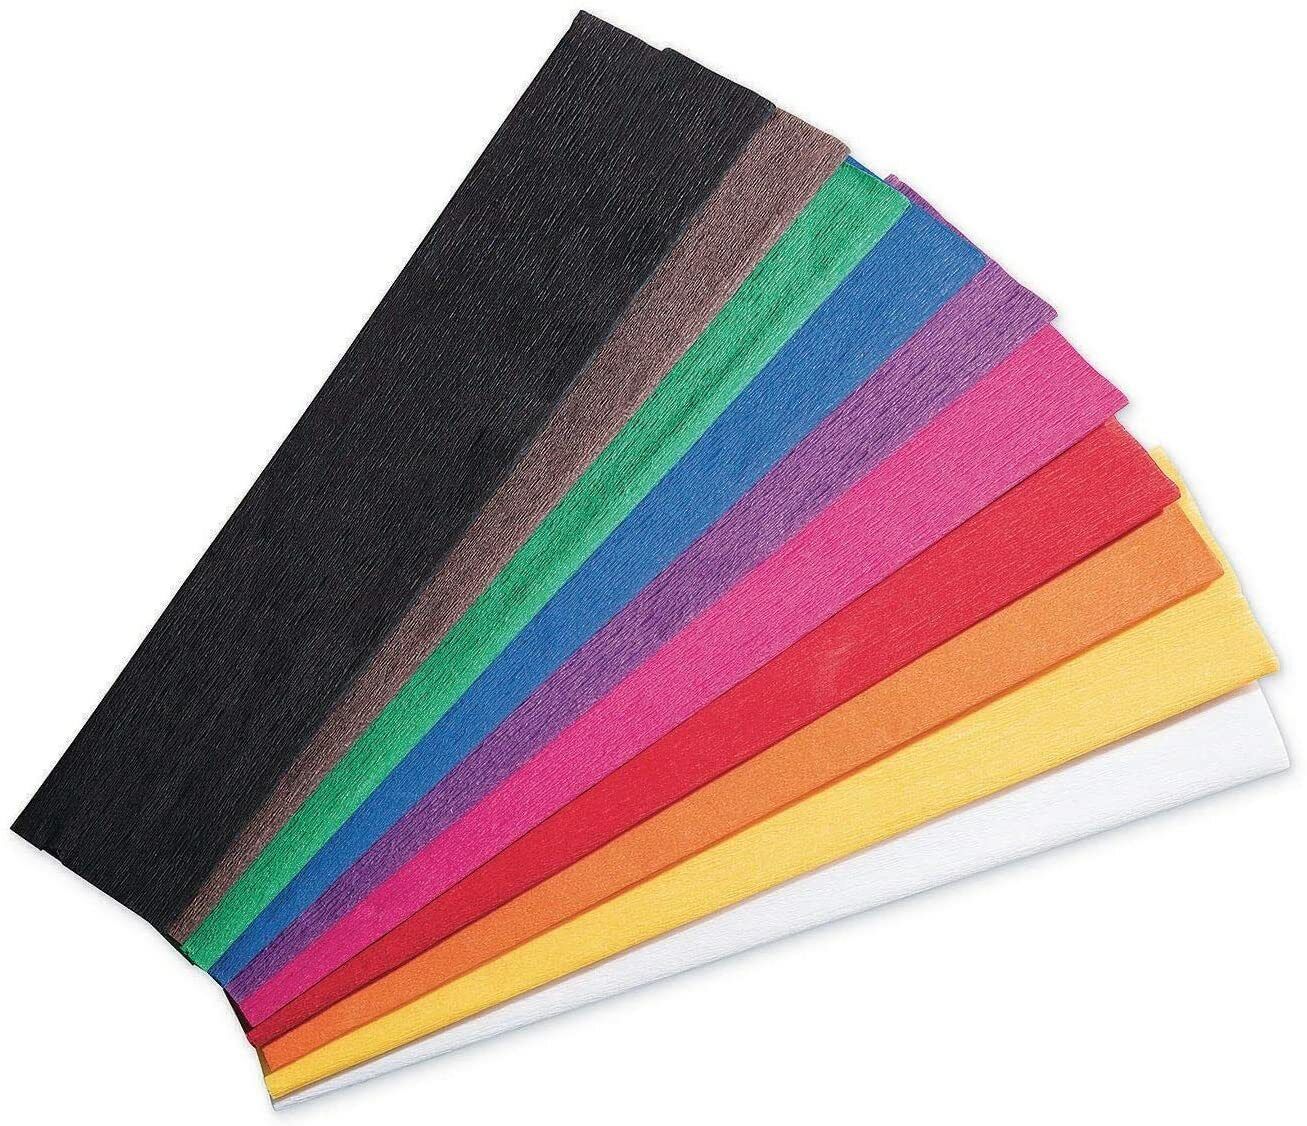 Creativity Street Crepe 10 Paper Sheets Assortment Colors 20 in X 7.5 ft